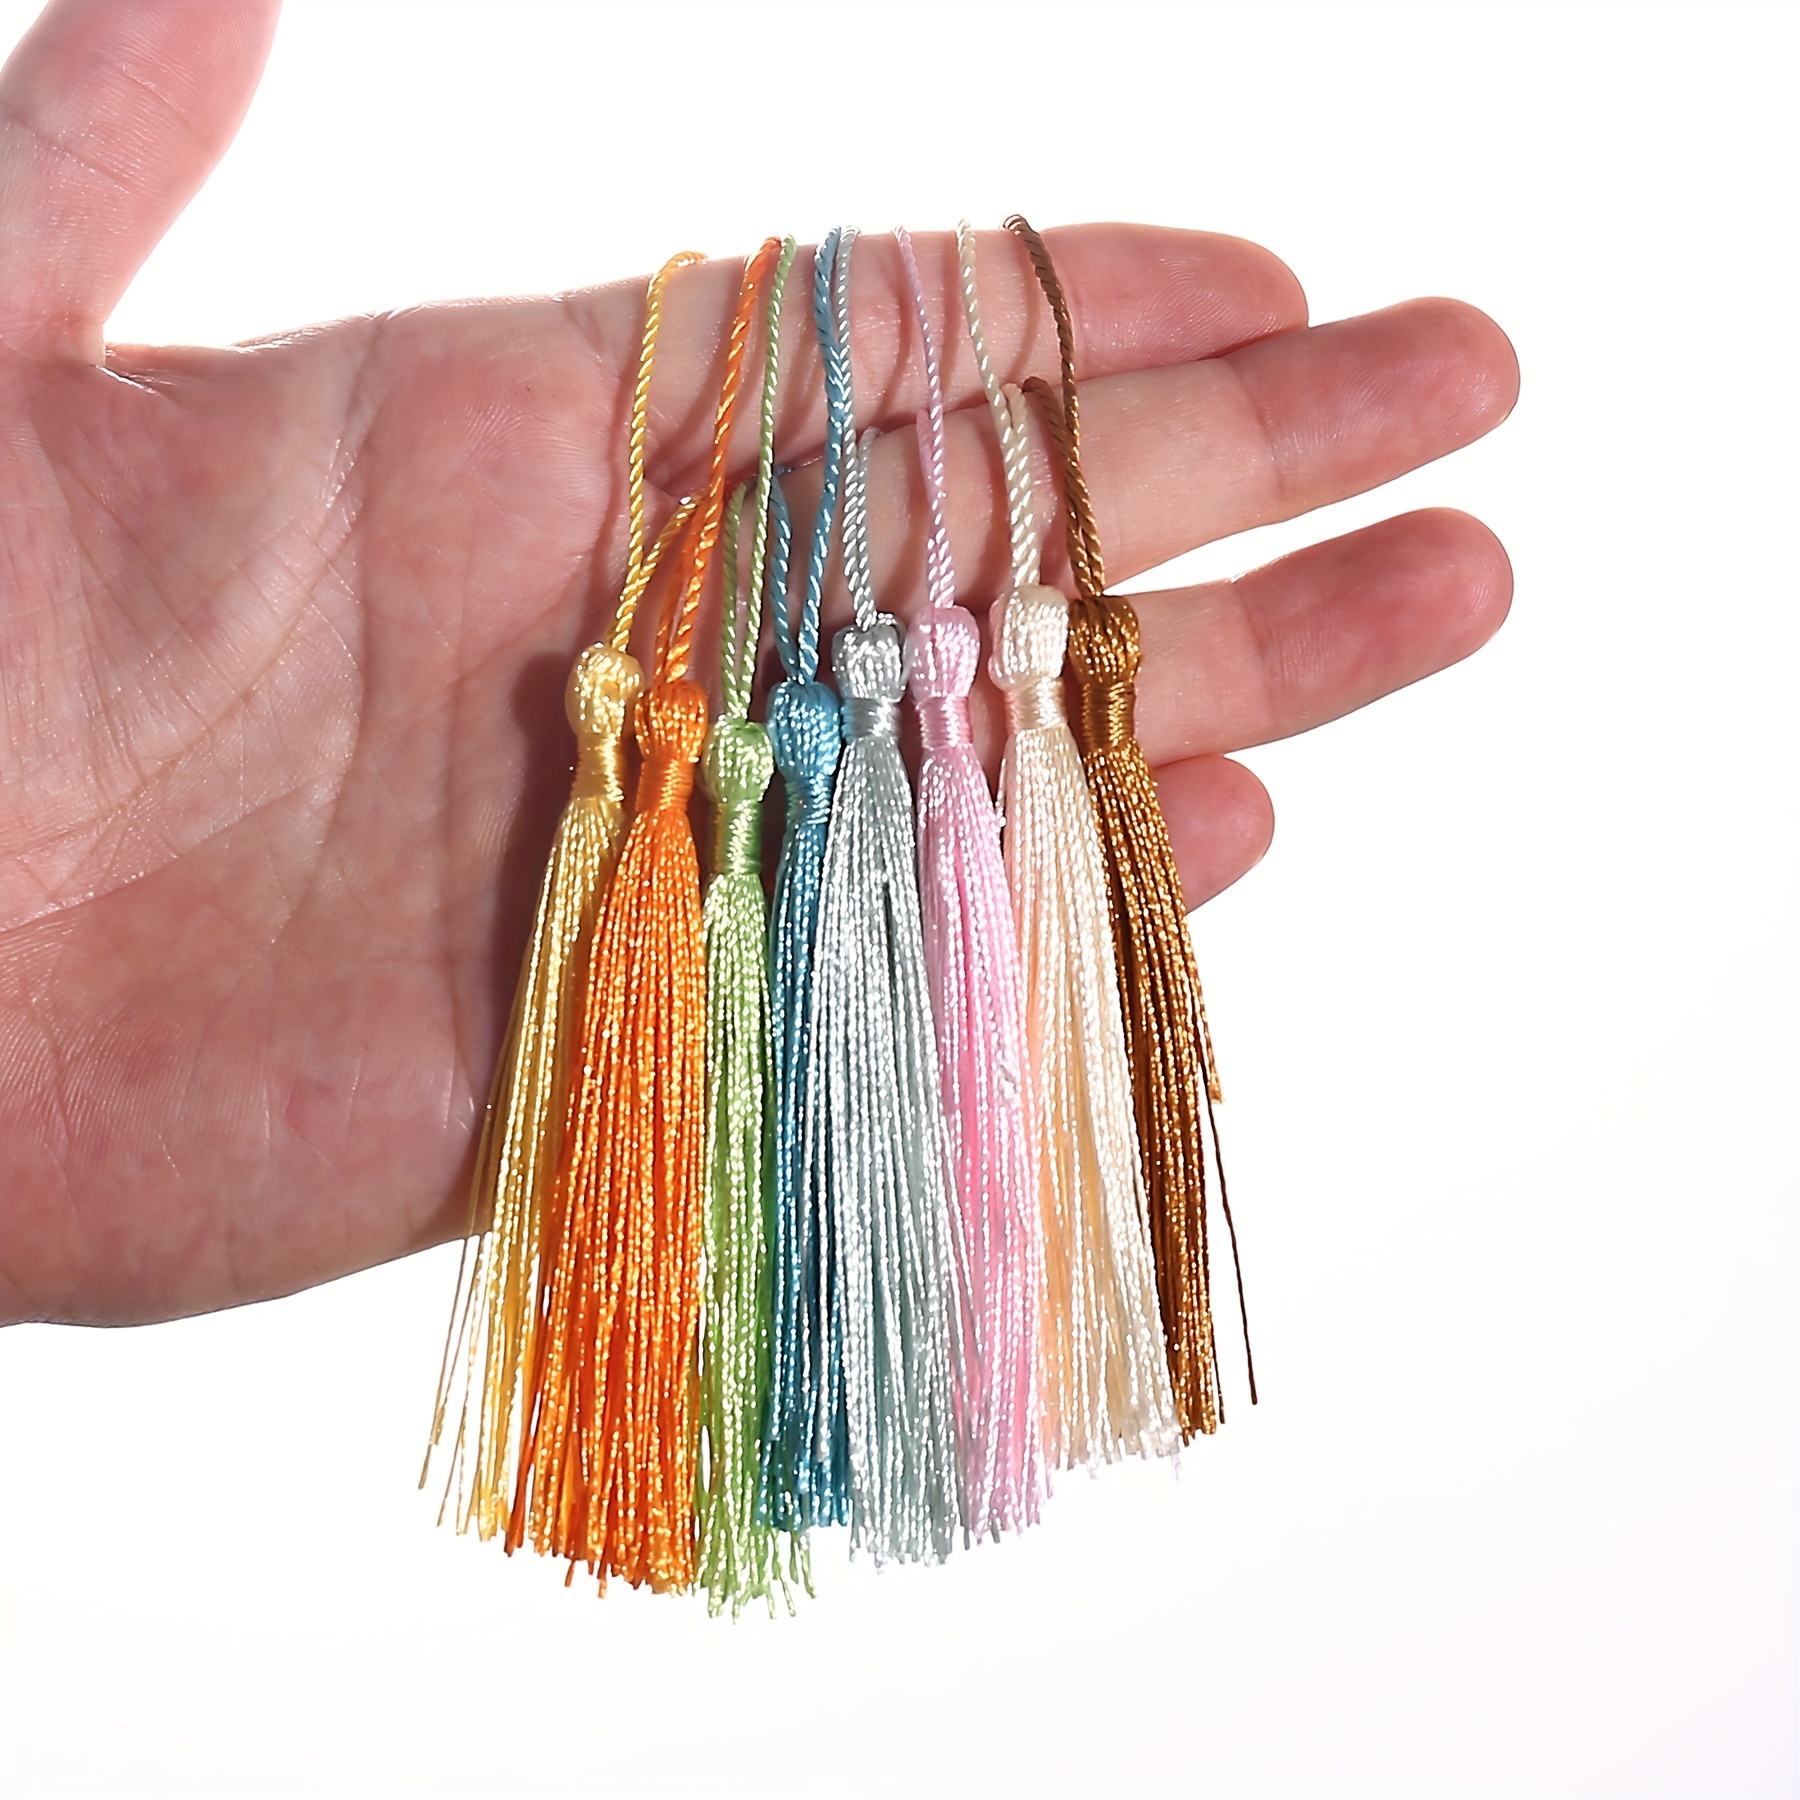 Makhry 100 Pieces Bookmark Tassels 13cm/5 Inch Silk Tassels with Loop  Handmade Tassels for Crafts Jewelry Making DIY Art Projects School